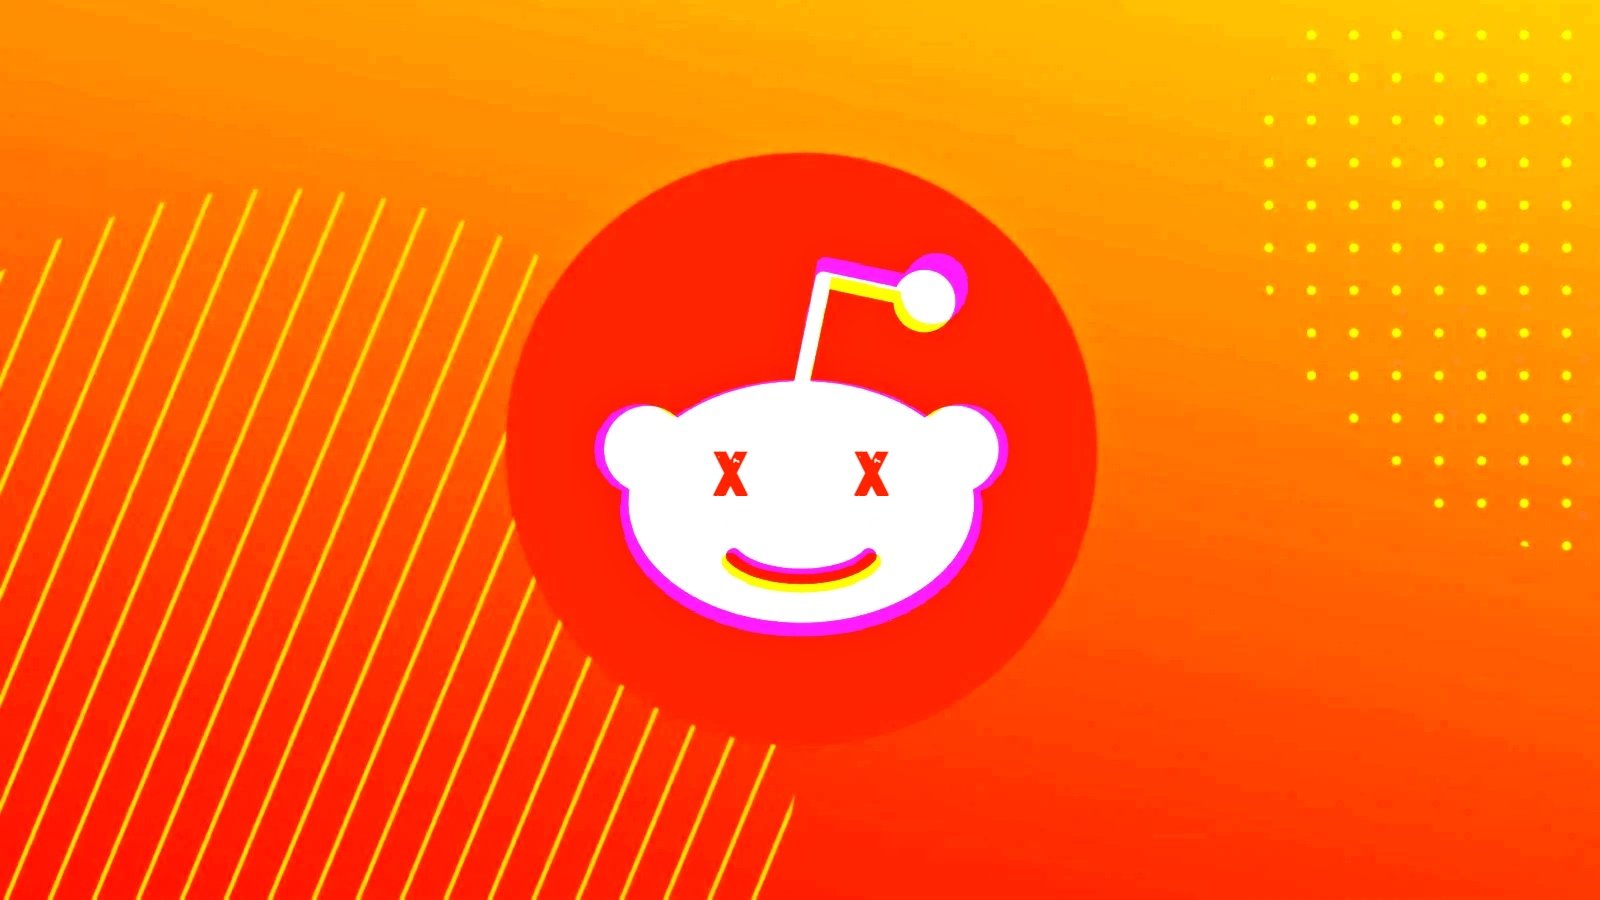 Reddit down in major outage blocking access to web, mobile apps